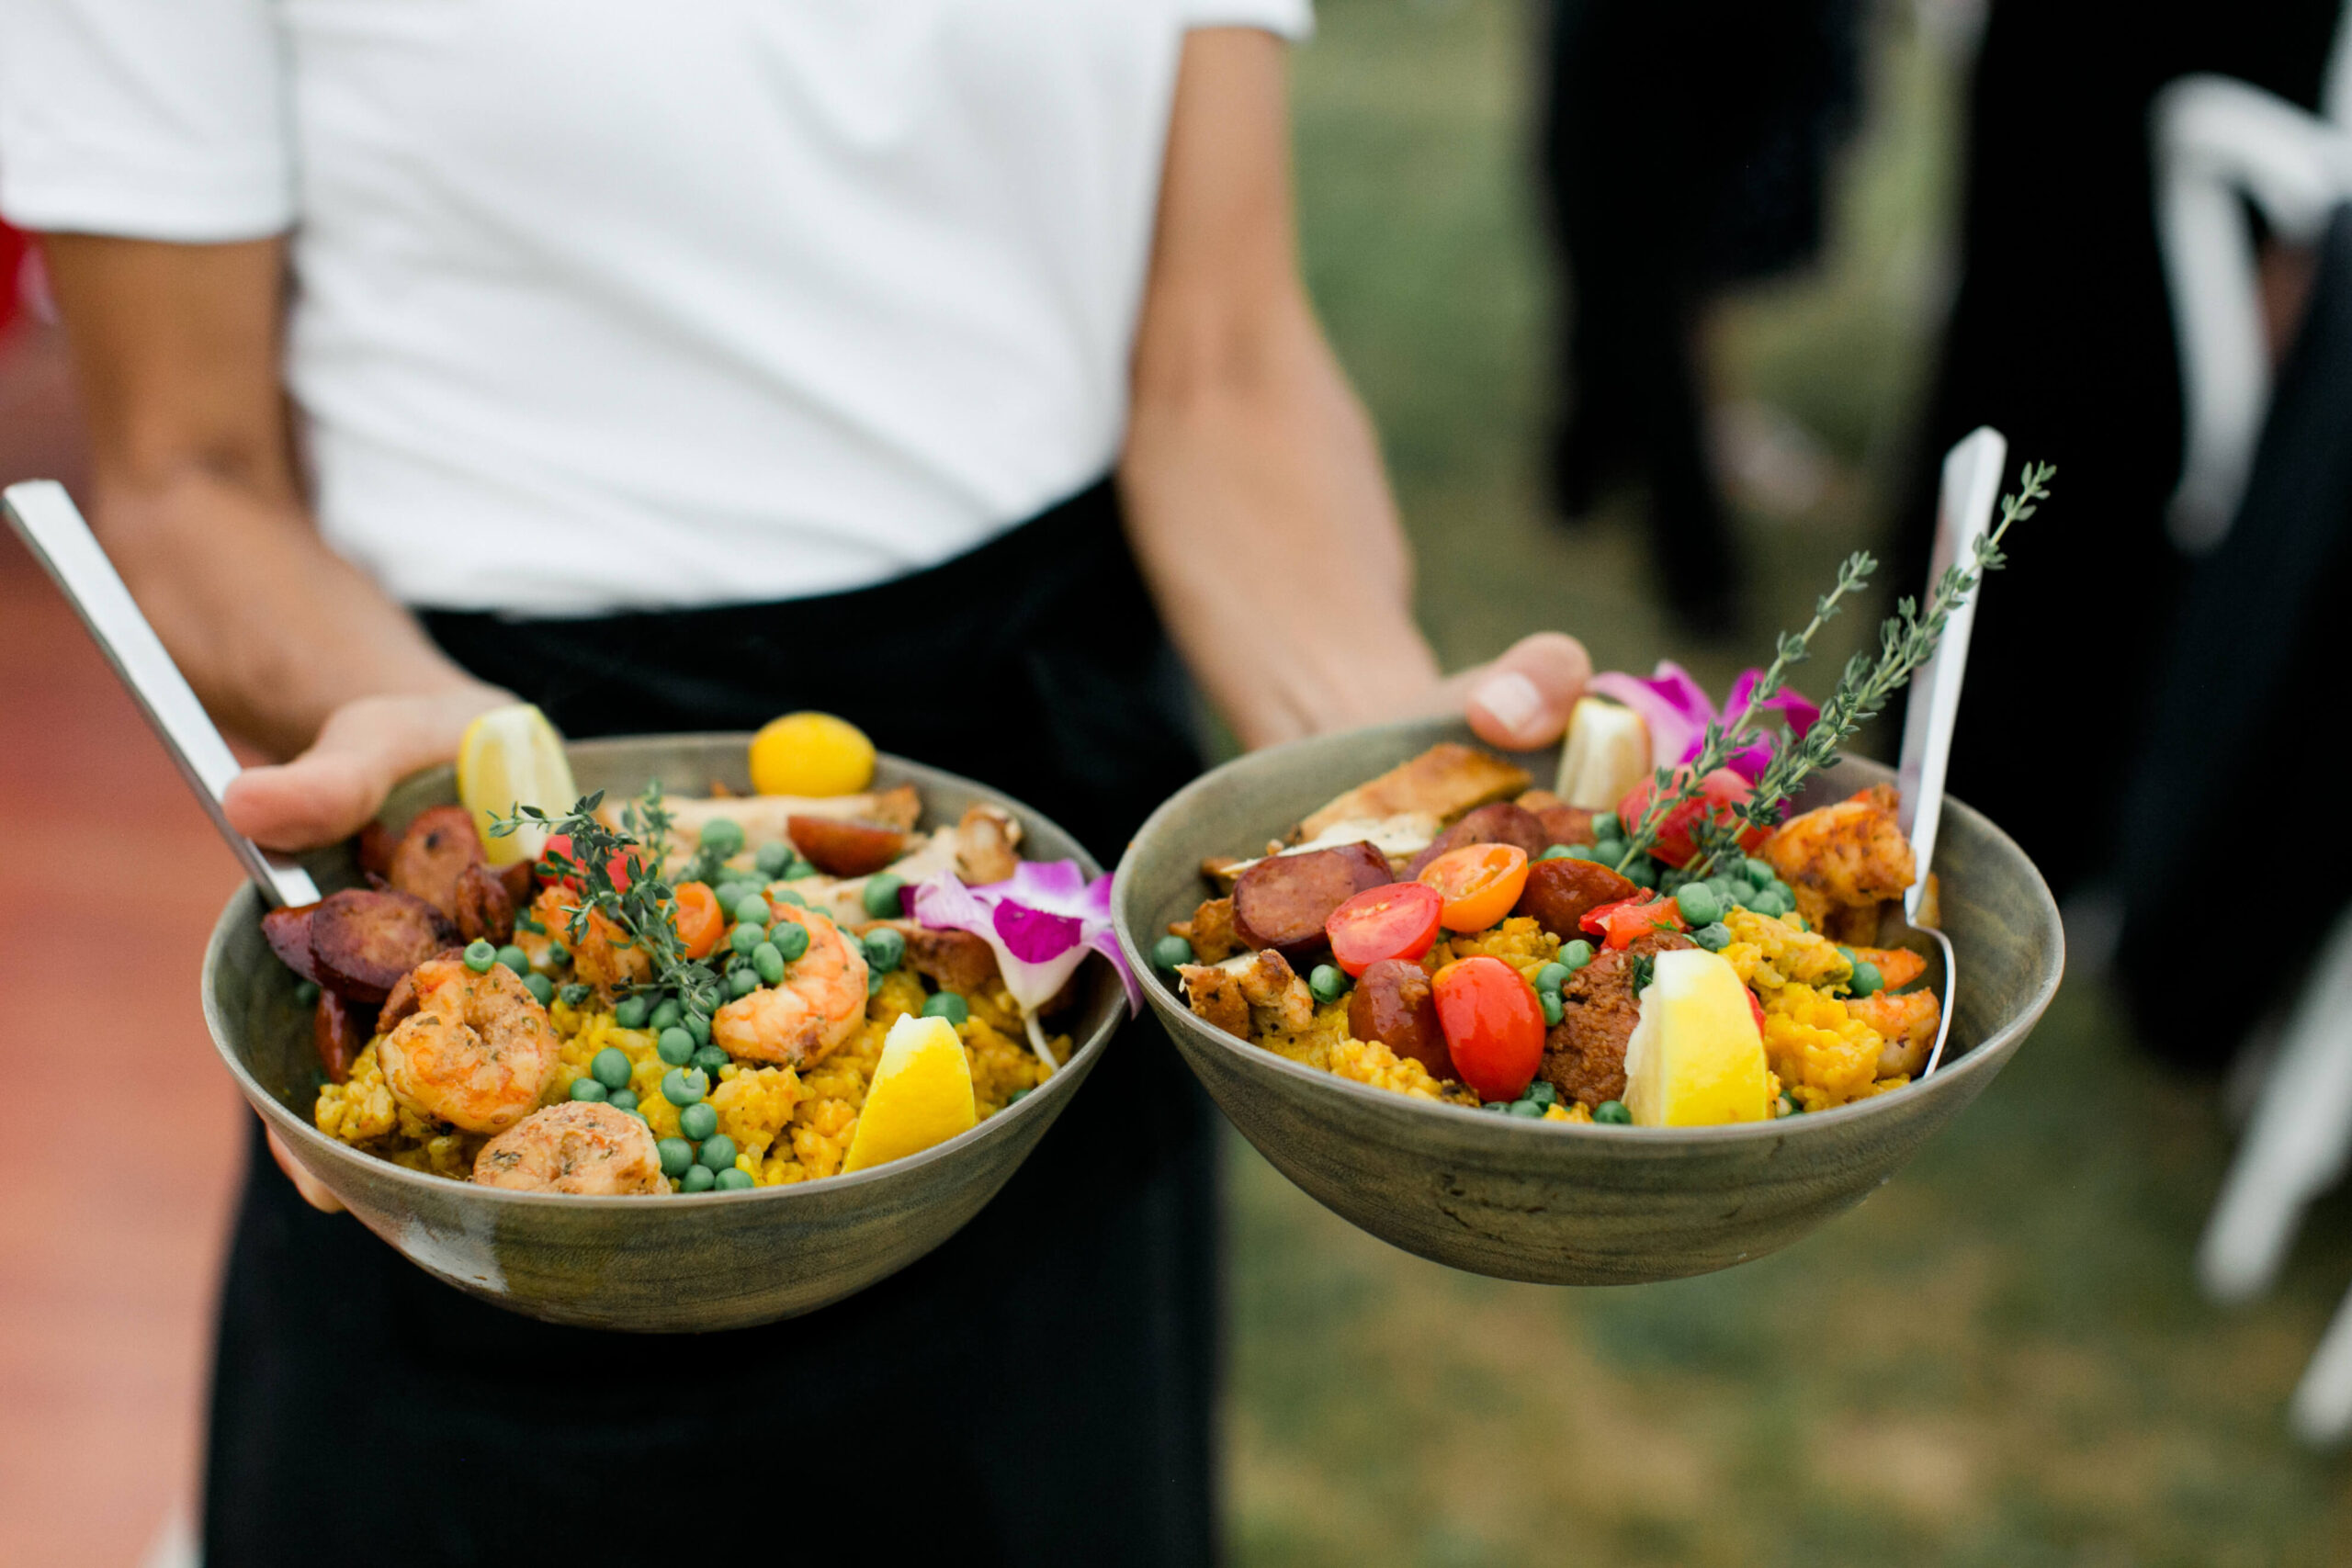 Paella was served to guests at this Connecticut wedding.